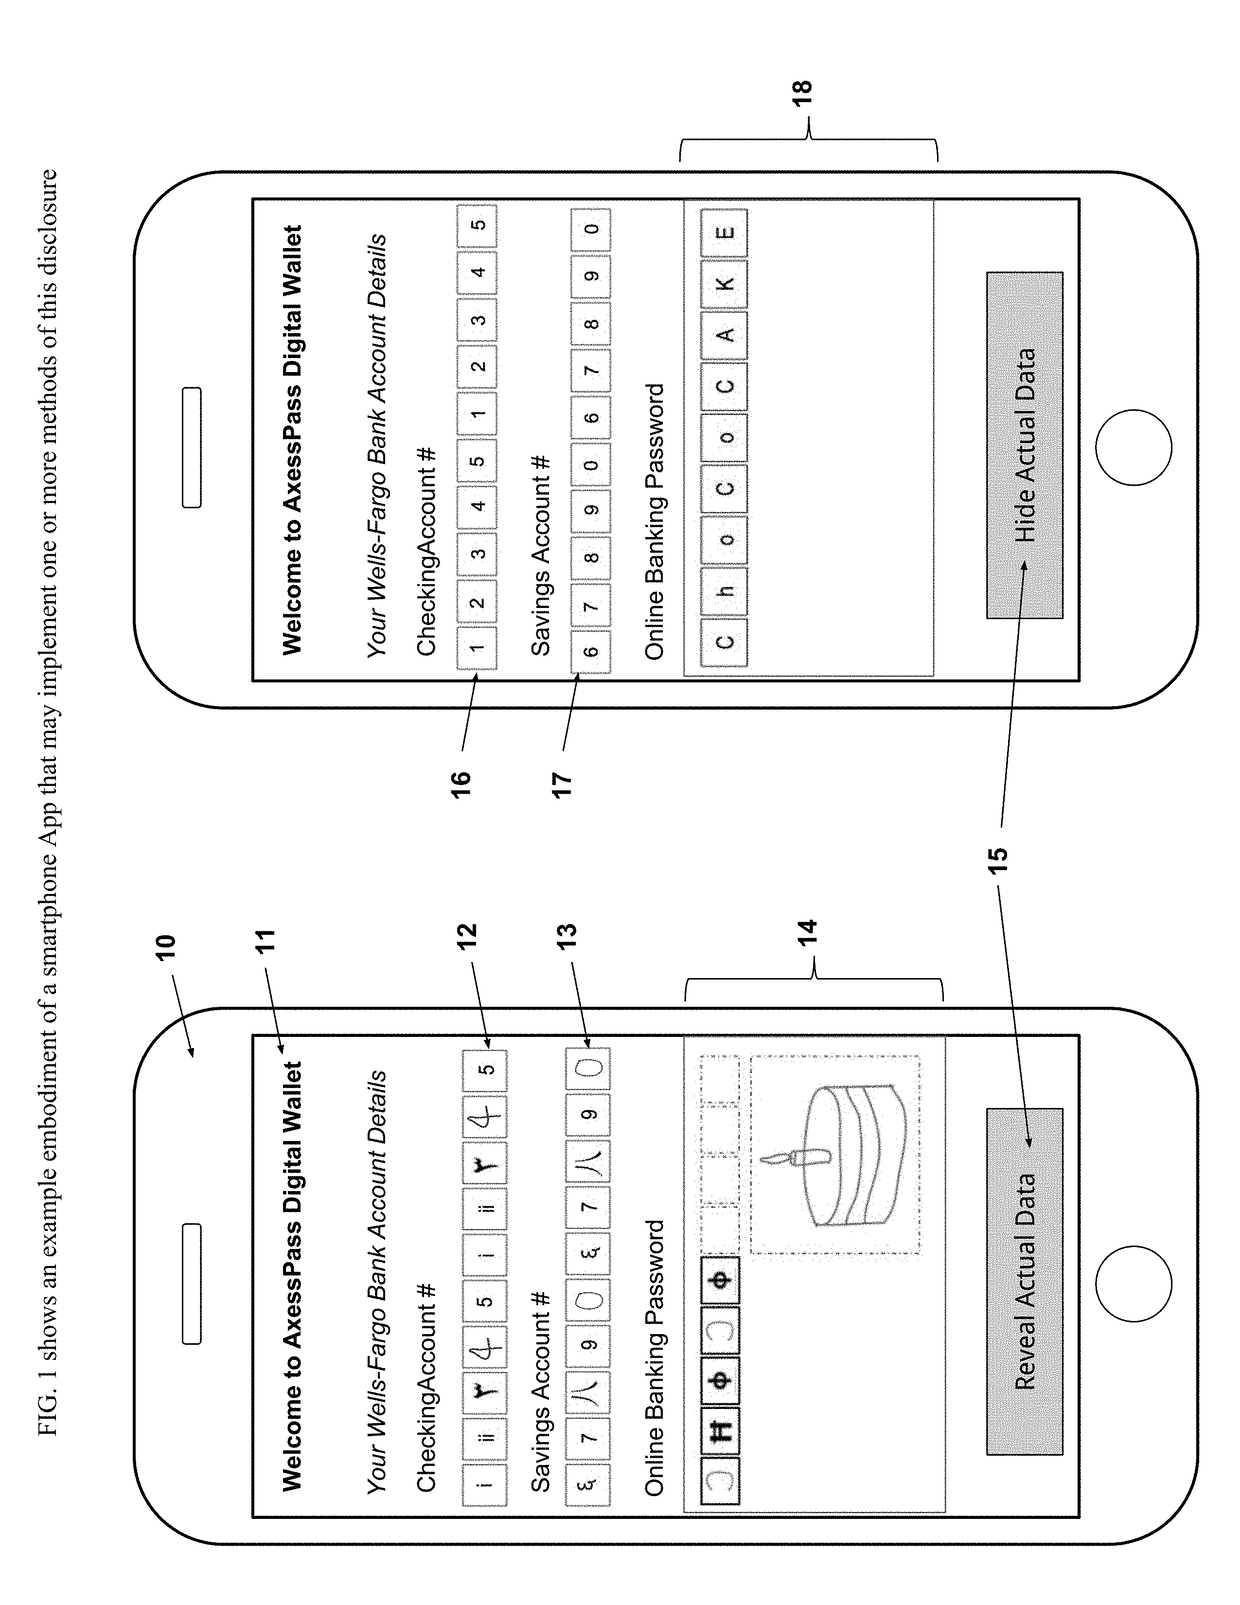 Method for saving, sending and recollection of confidential user data